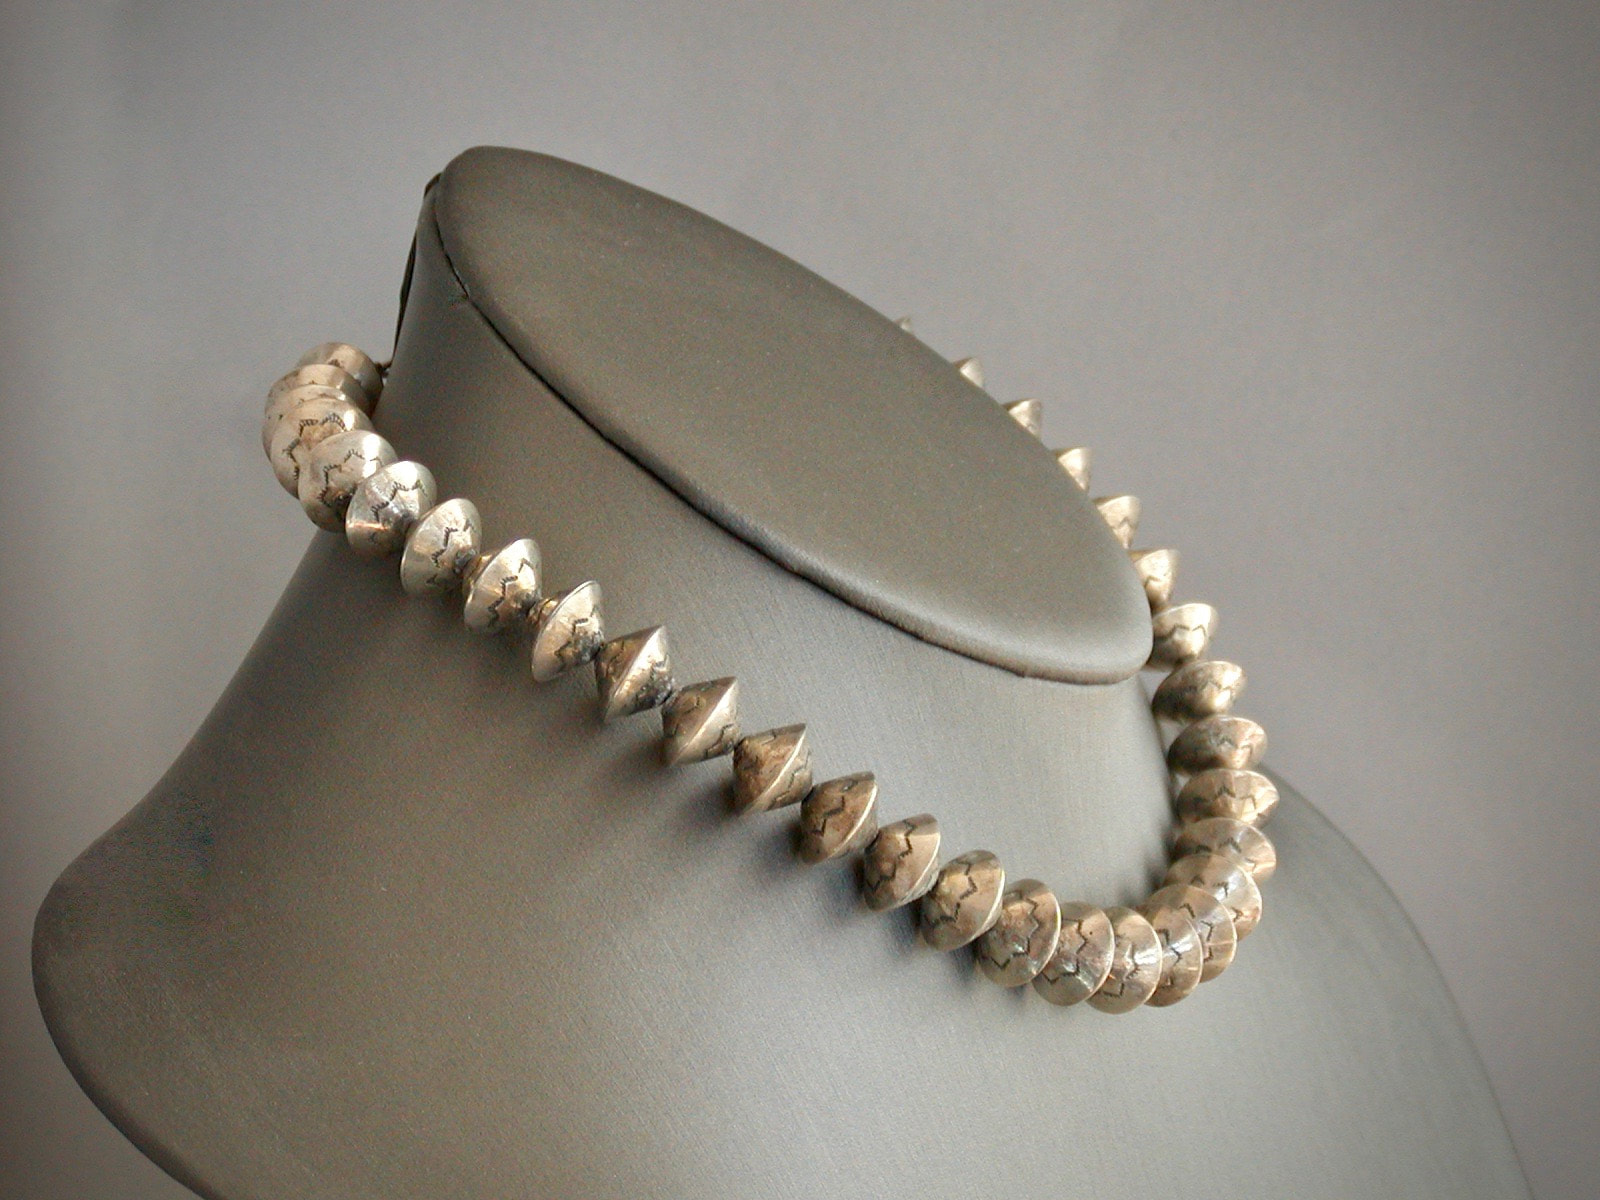 10mm Navajo Pearl Necklace, .925 Sterling Silver Real Genuine Large Navajo  Pearls Beaded Necklace, Native American Desert Pearl Boho Choker - Etsy